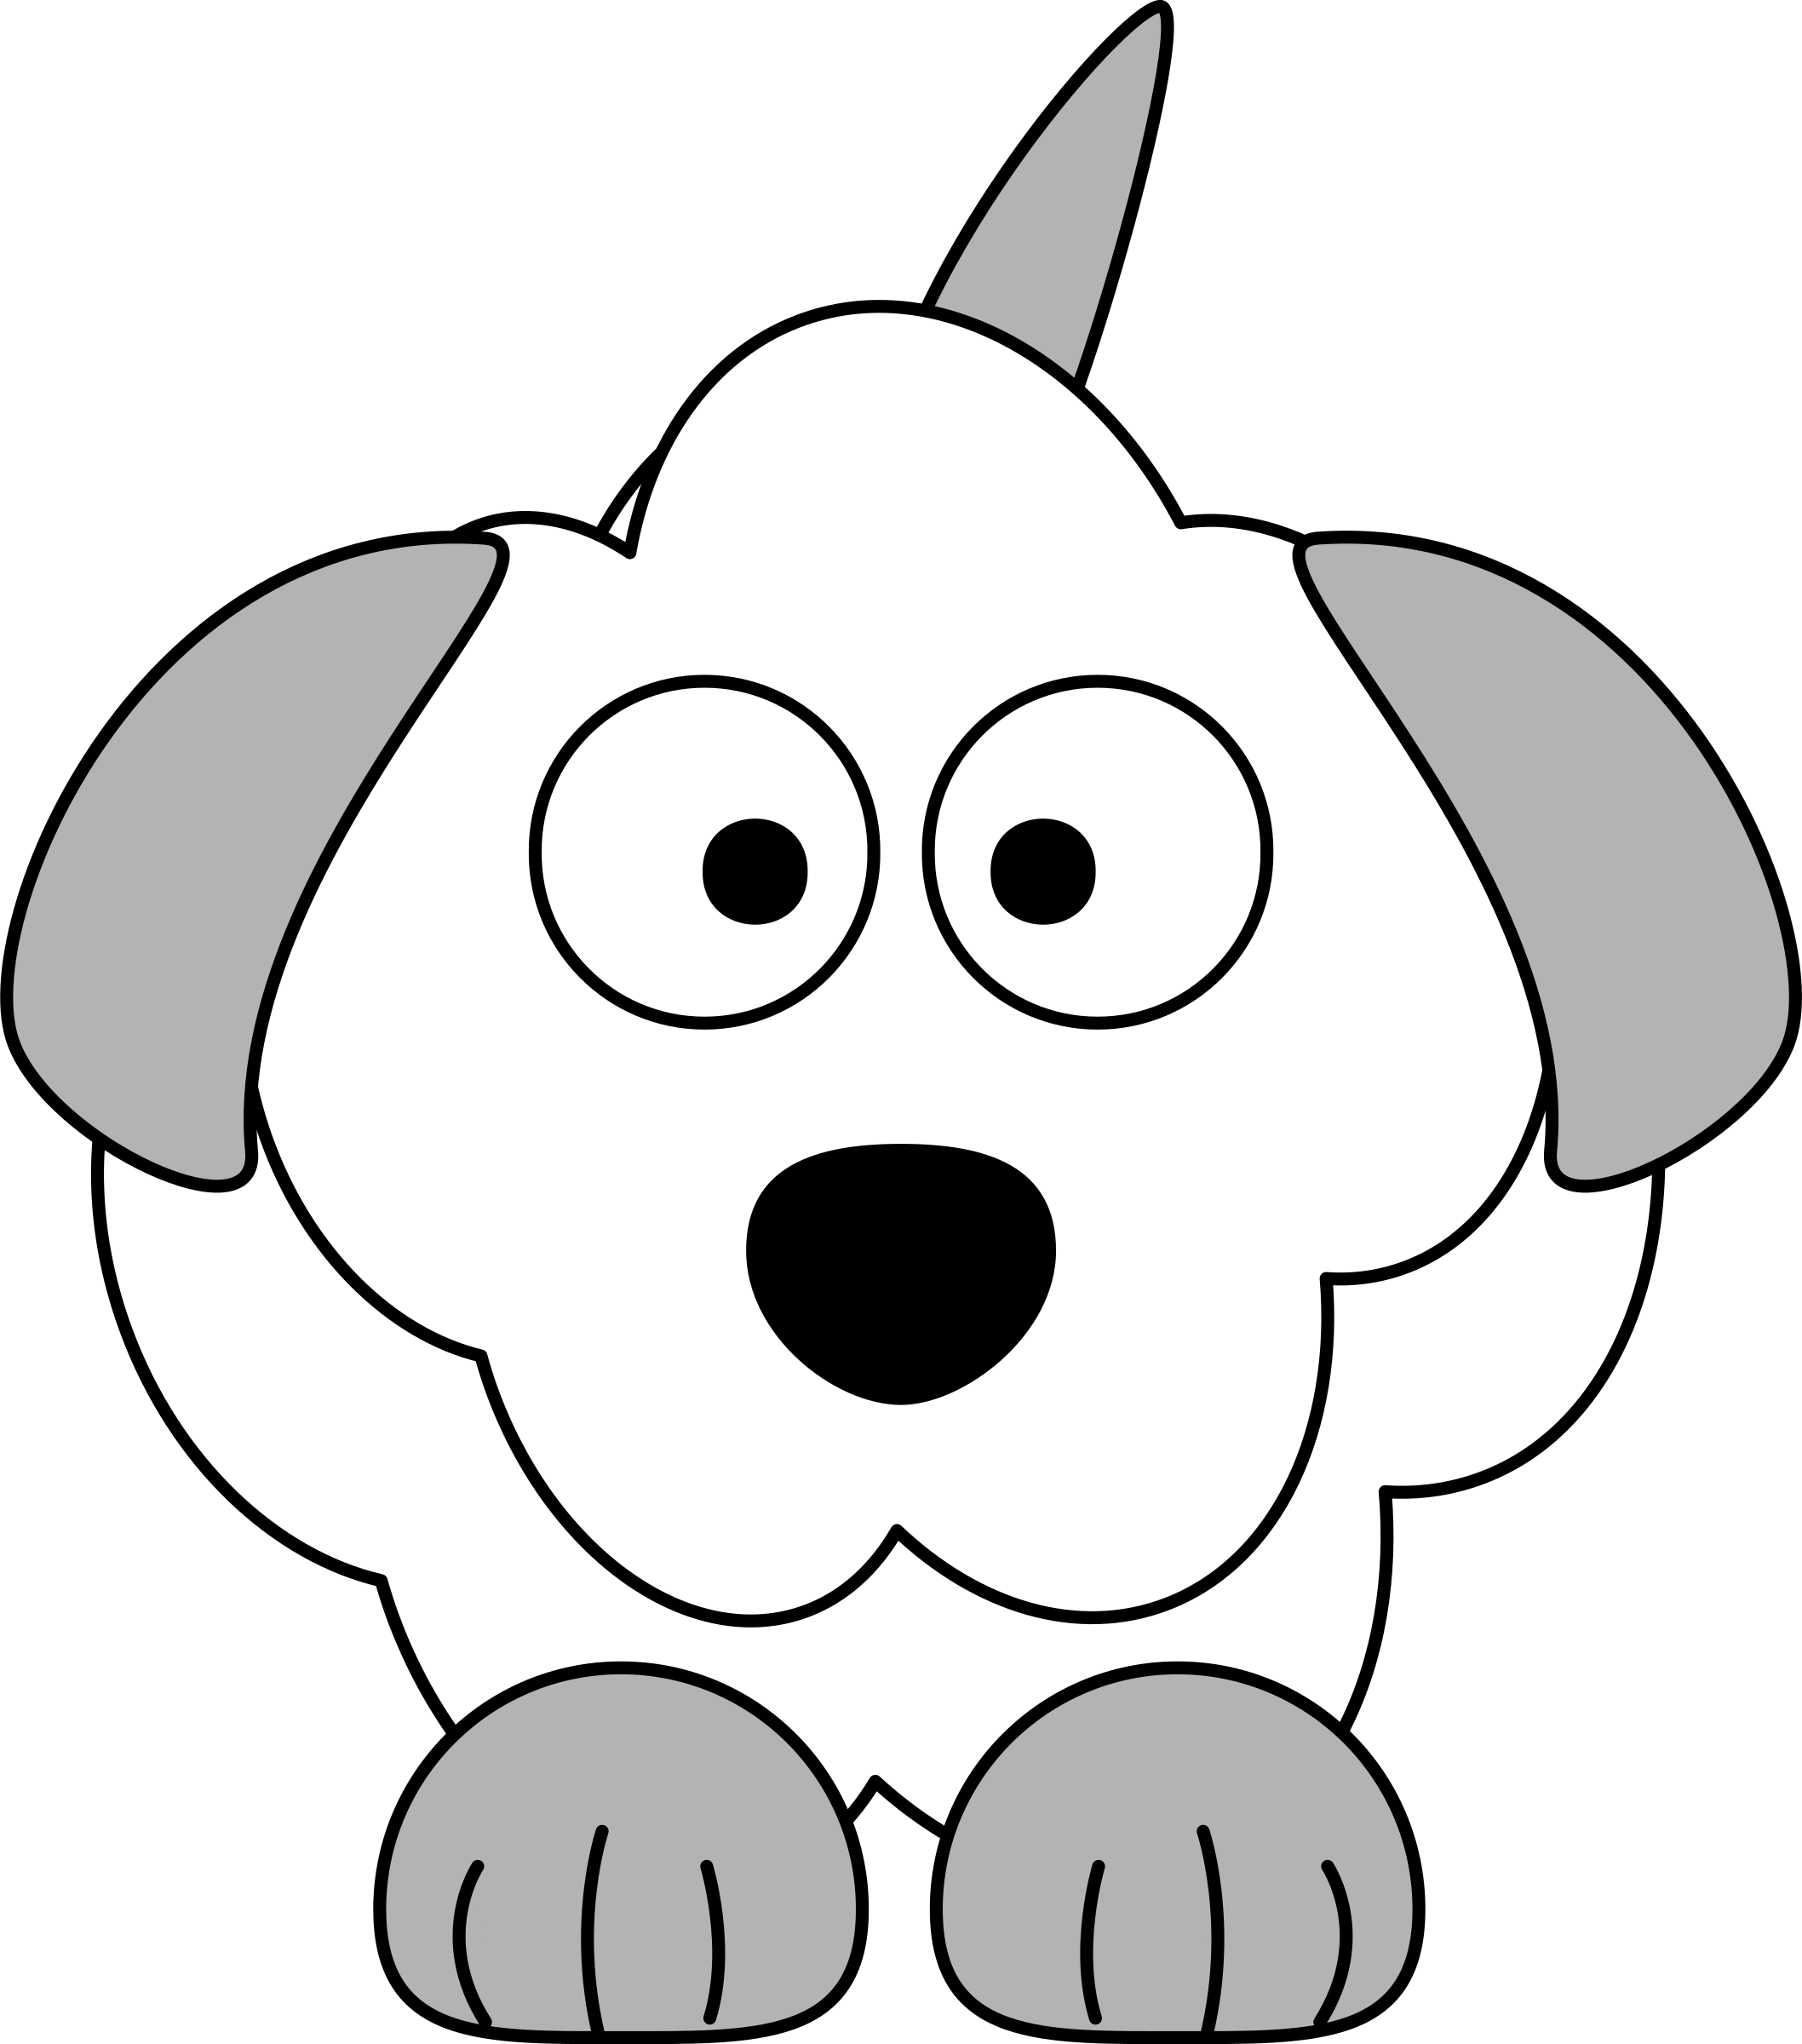 Nose clipart dog